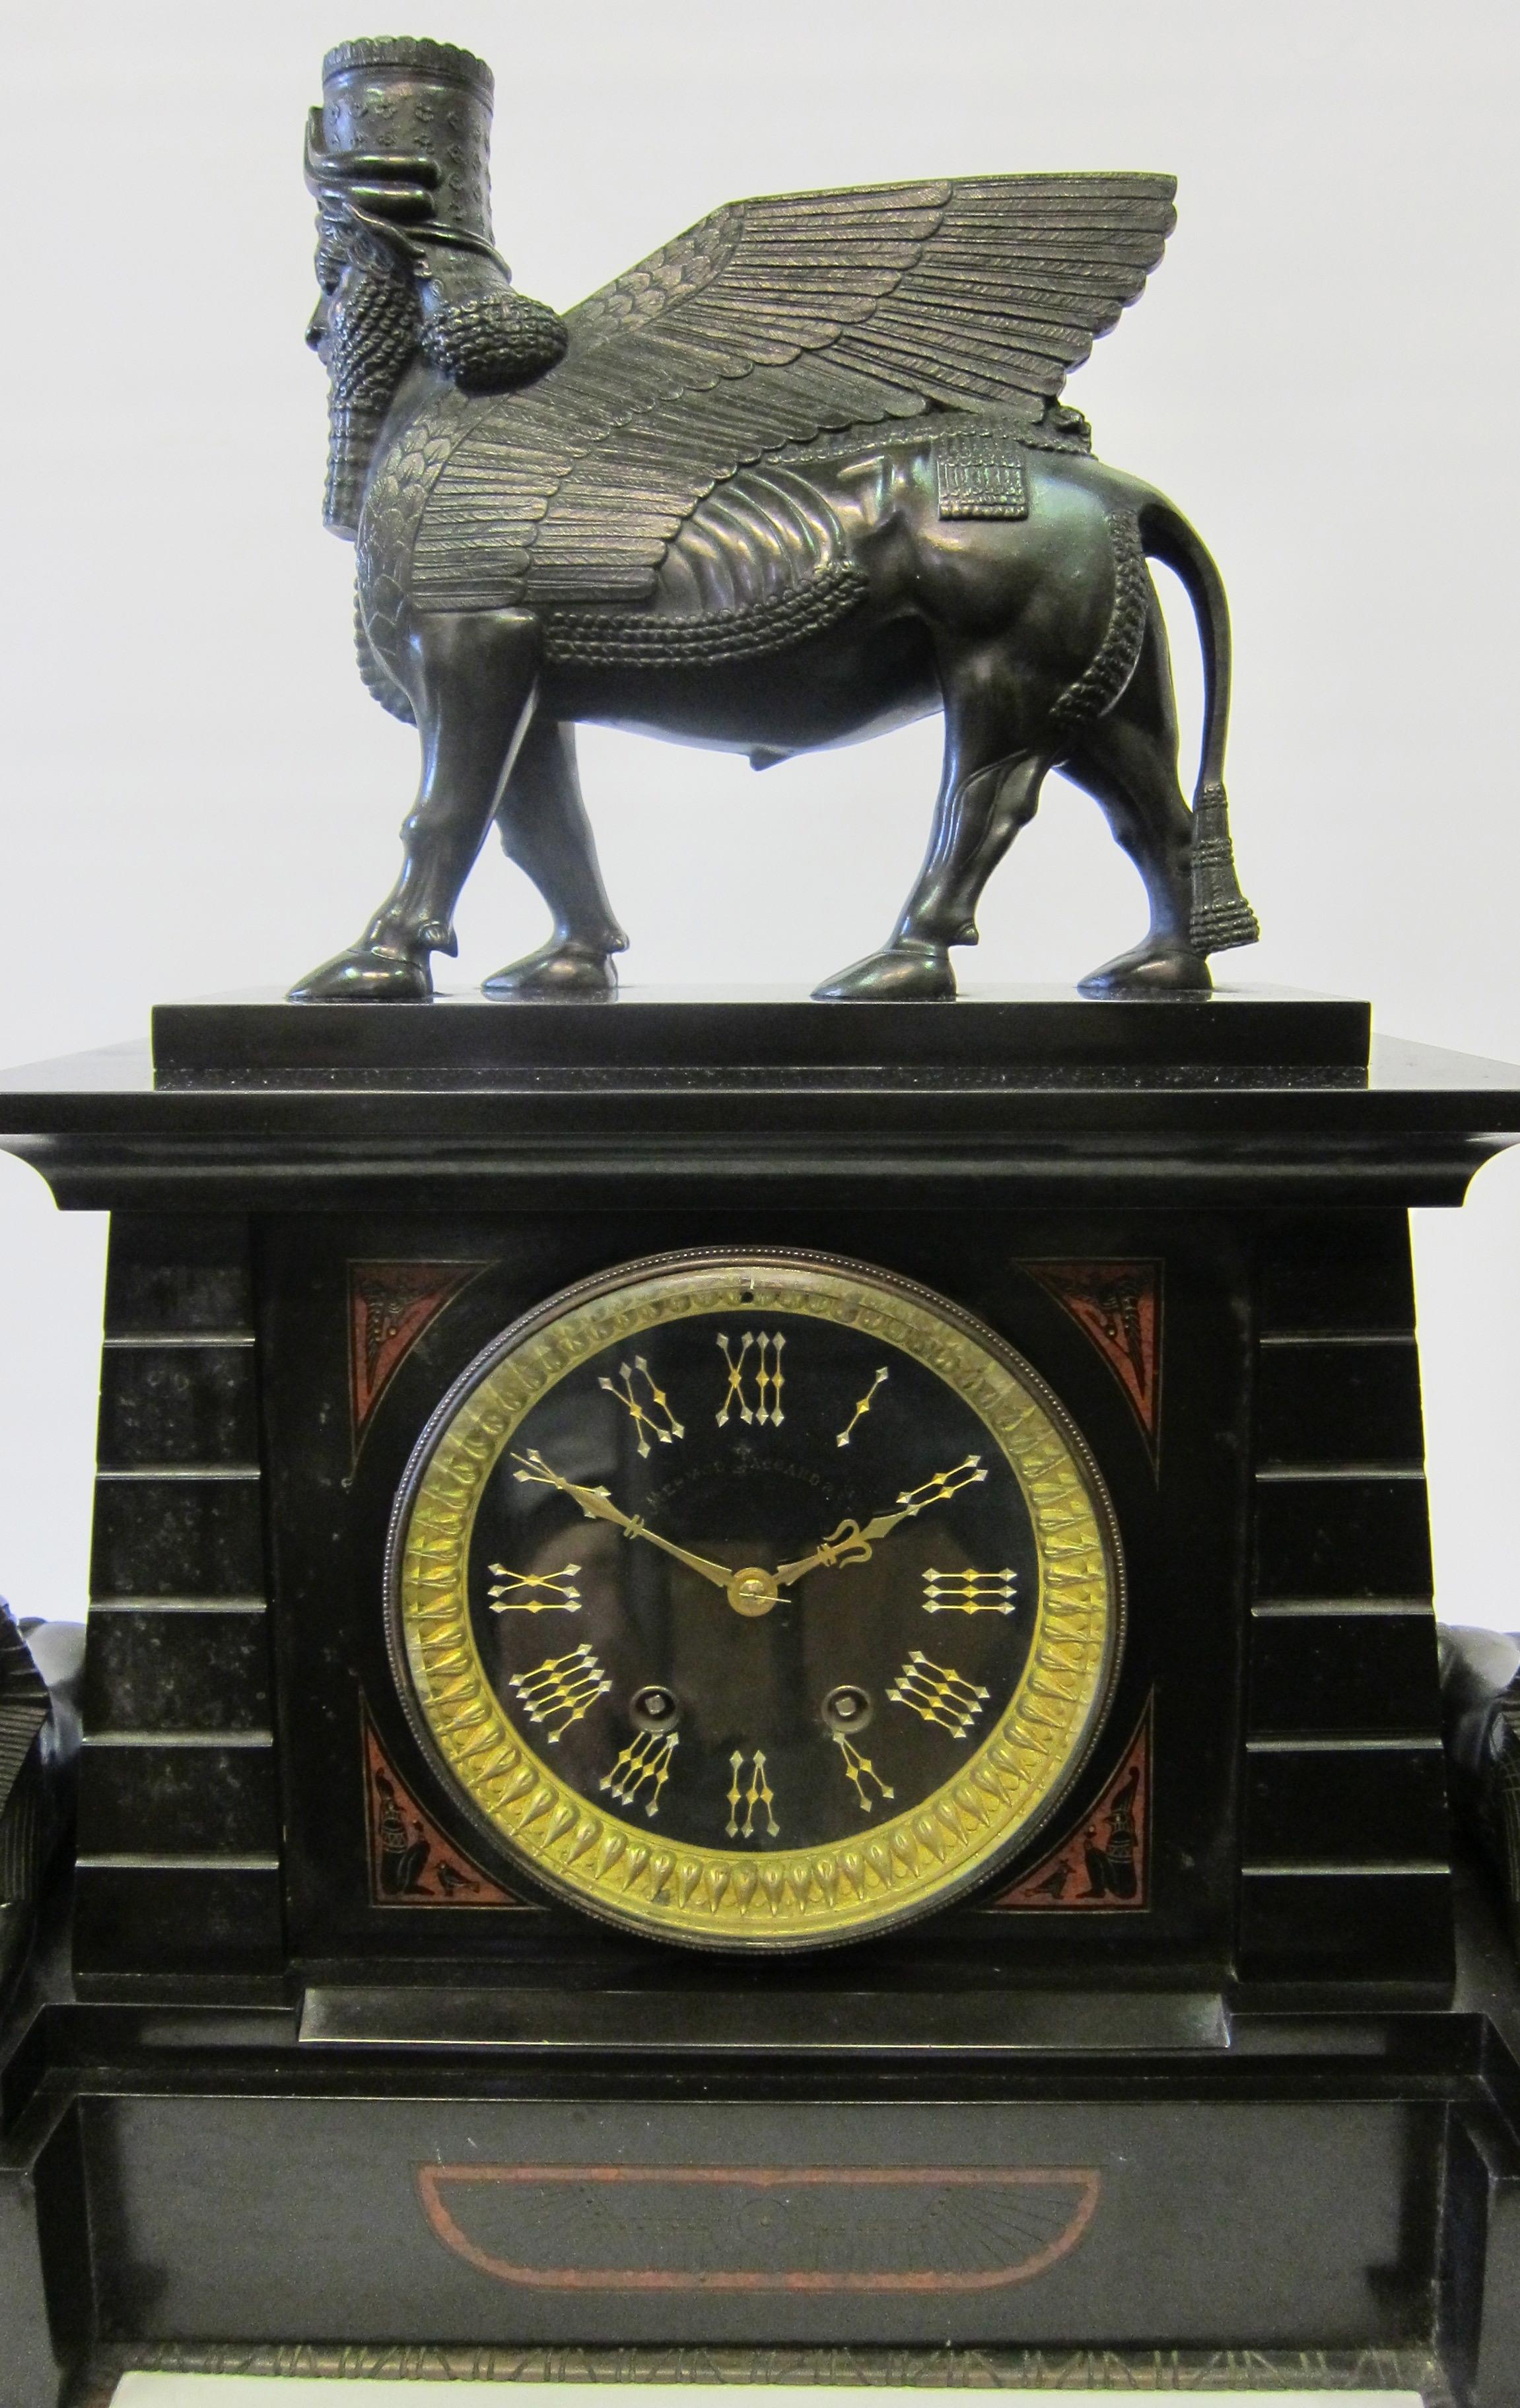 This wonderful 1920s Egyptian Revival clock is surmounted with an Assyrian style lamassau (human headed winged lion) and flanked by a pair of reclining sphinx. The clock case etc. is made of black marble and decorated with faux hieroglyphics and